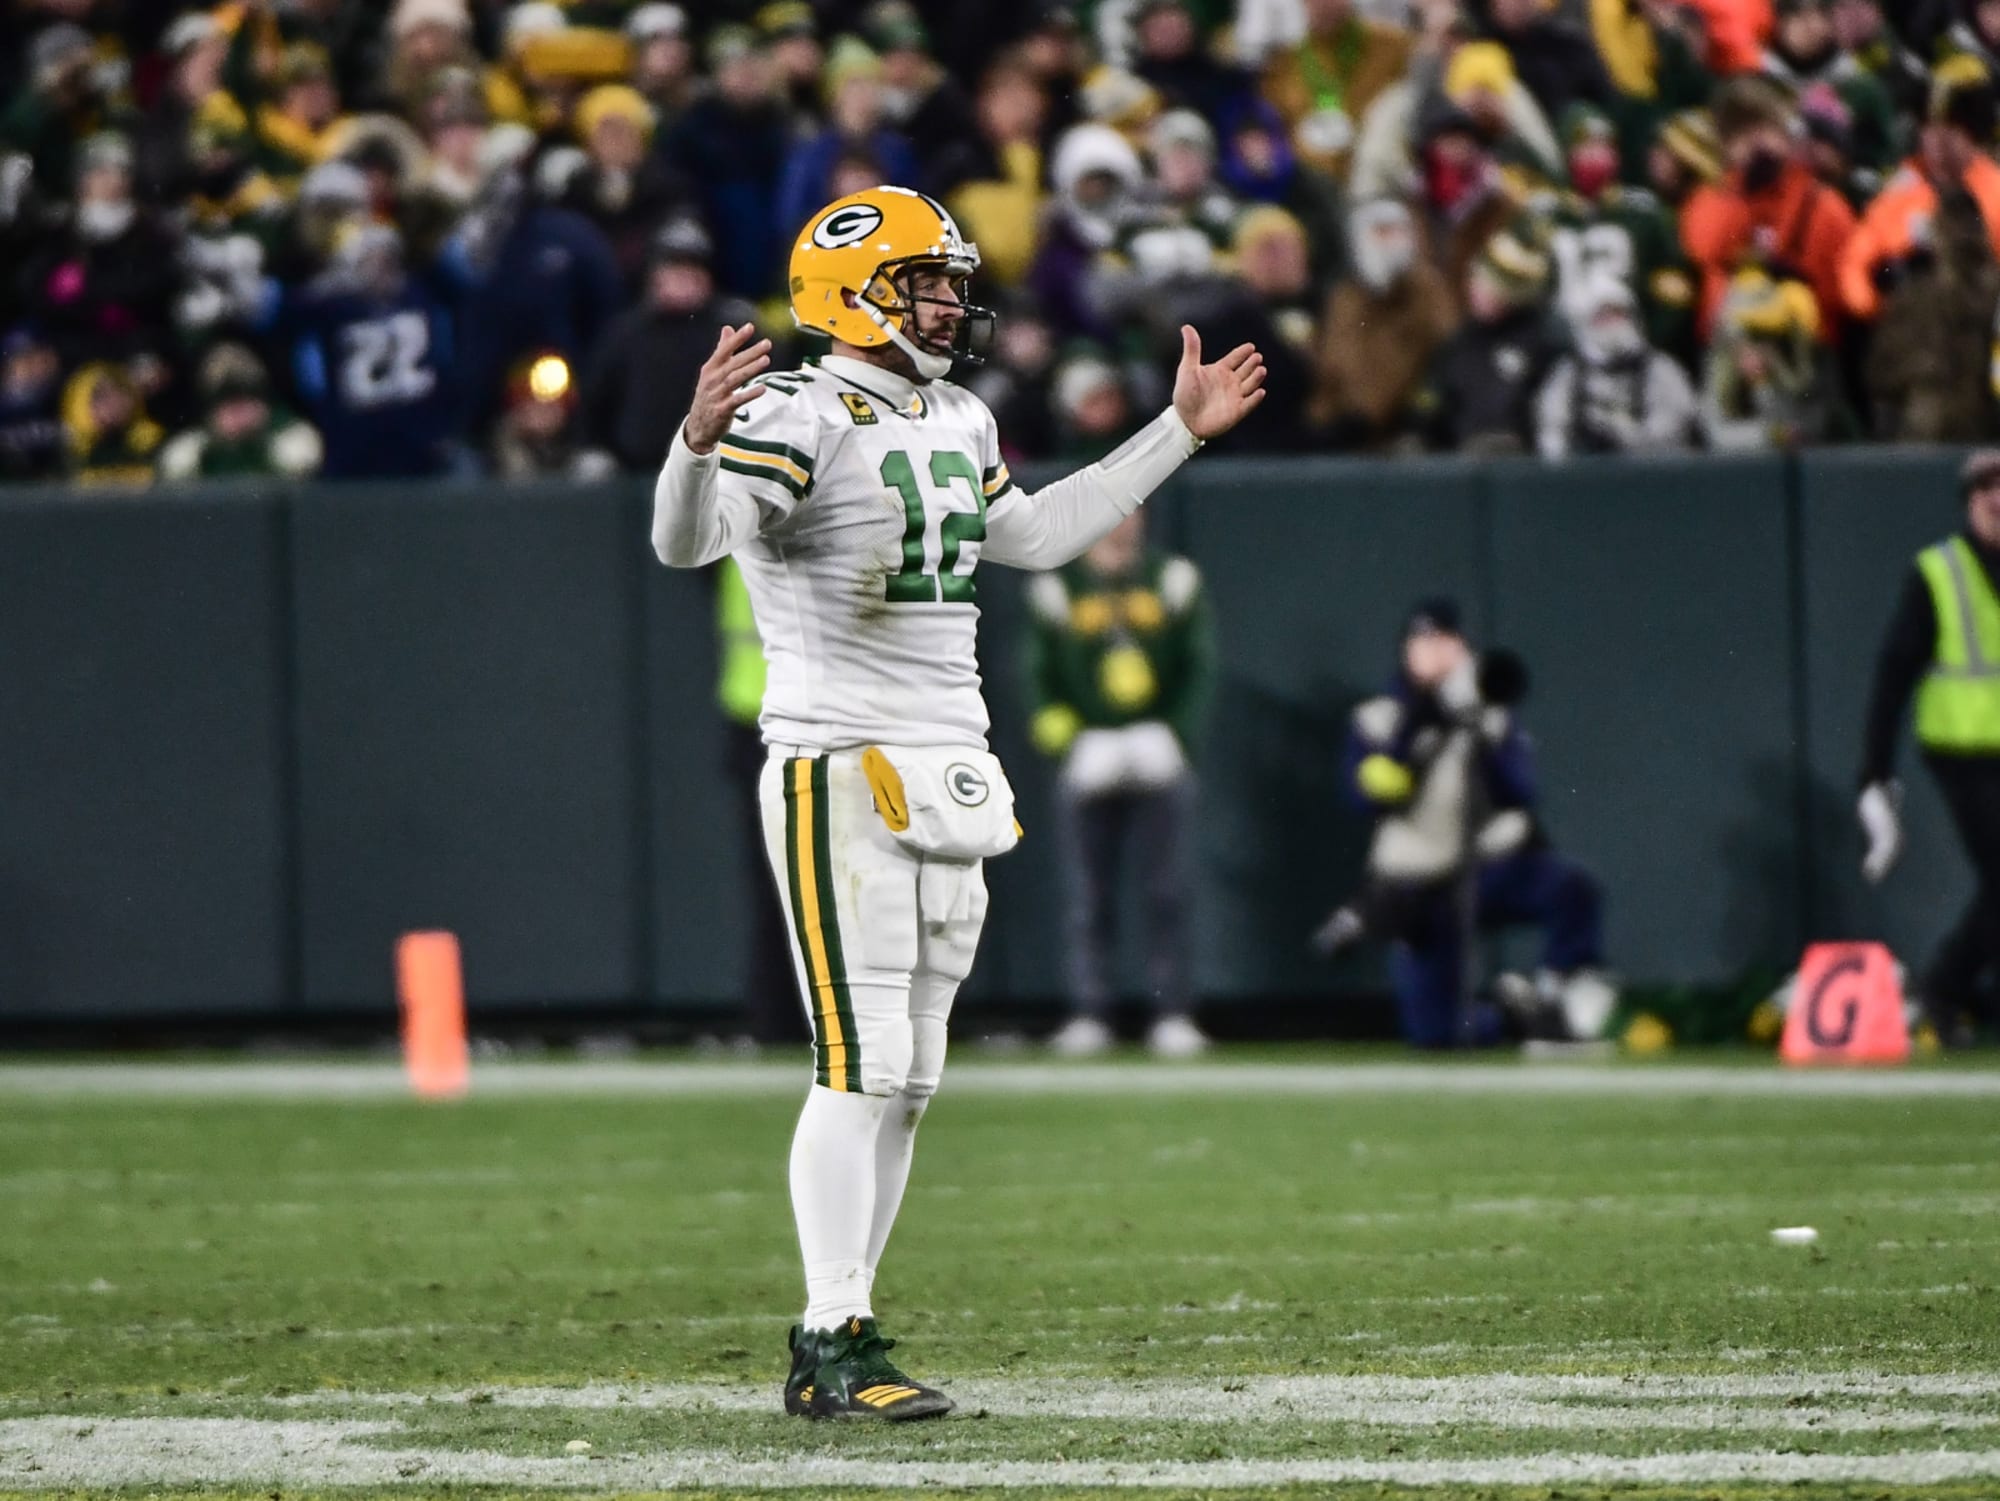 Nov 17, 2022; Green Bay, Wisconsin, USA; Green Bay Packers quarterback Aaron Rodgers (12) reacts after throwing an incomplete pass on fourth down late in the fourth quarter against the Tennessee Titans at Lambeau Field. Mandatory Credit: Benny Sieu-USA TODAY Sports